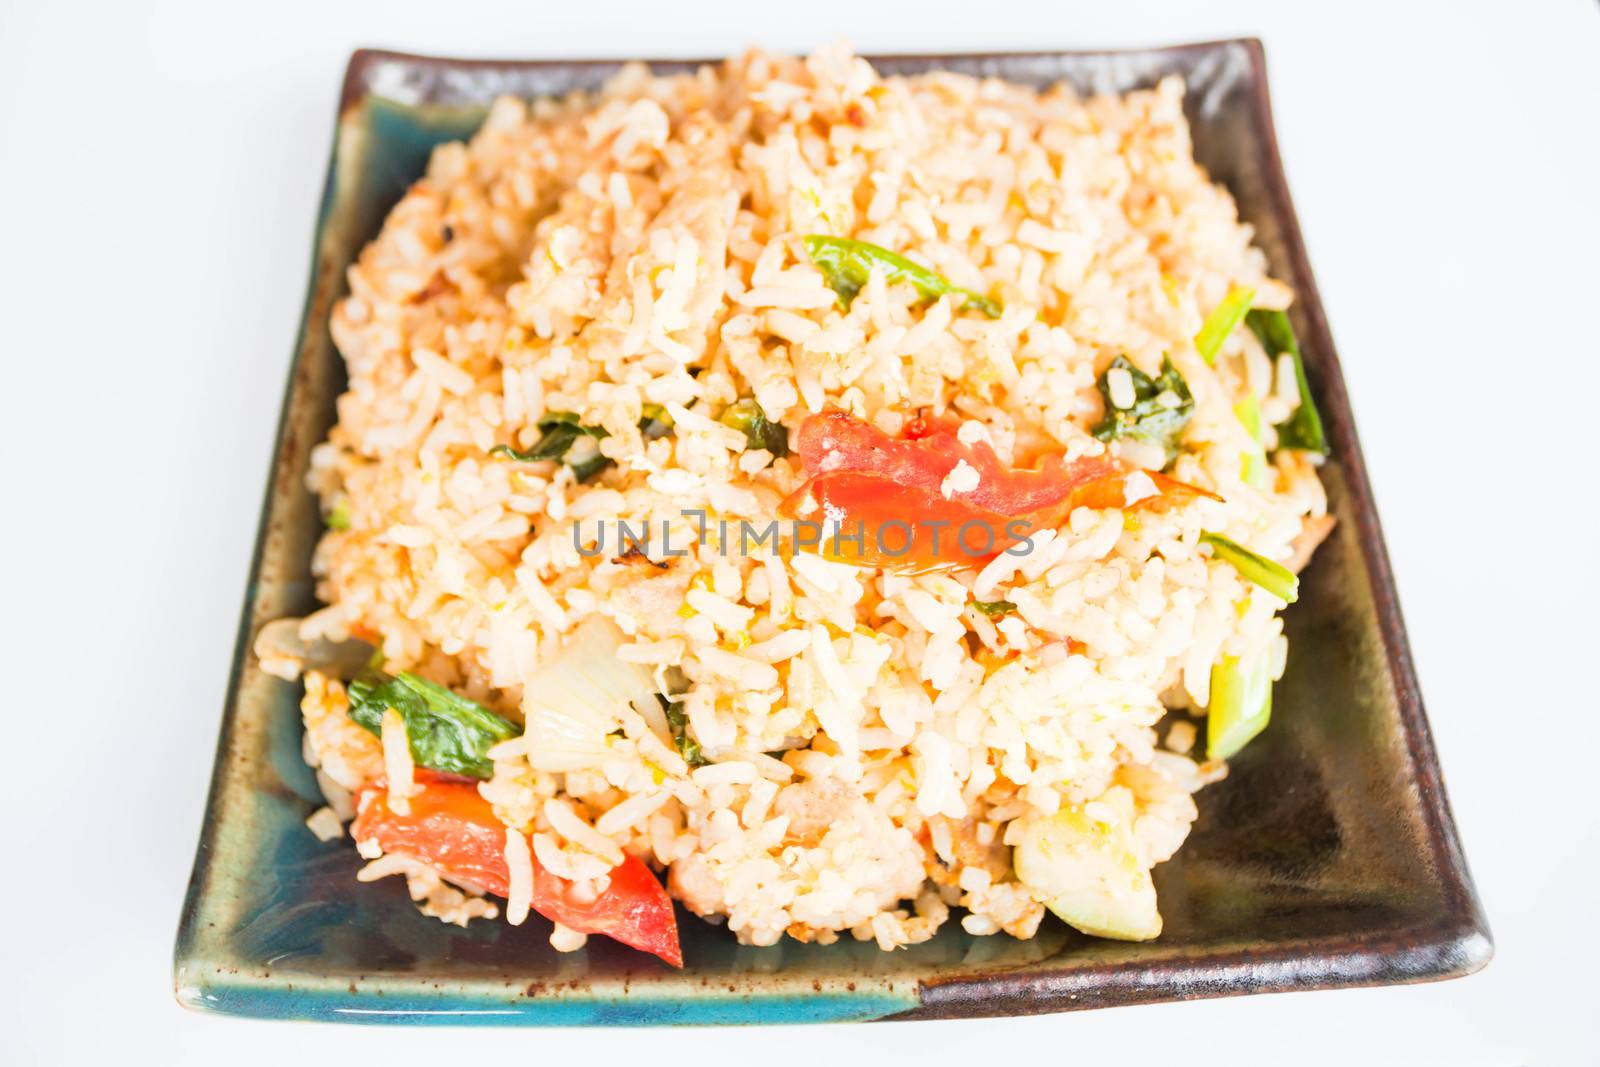 Fried rice with deep fried pork garlic and vegetable